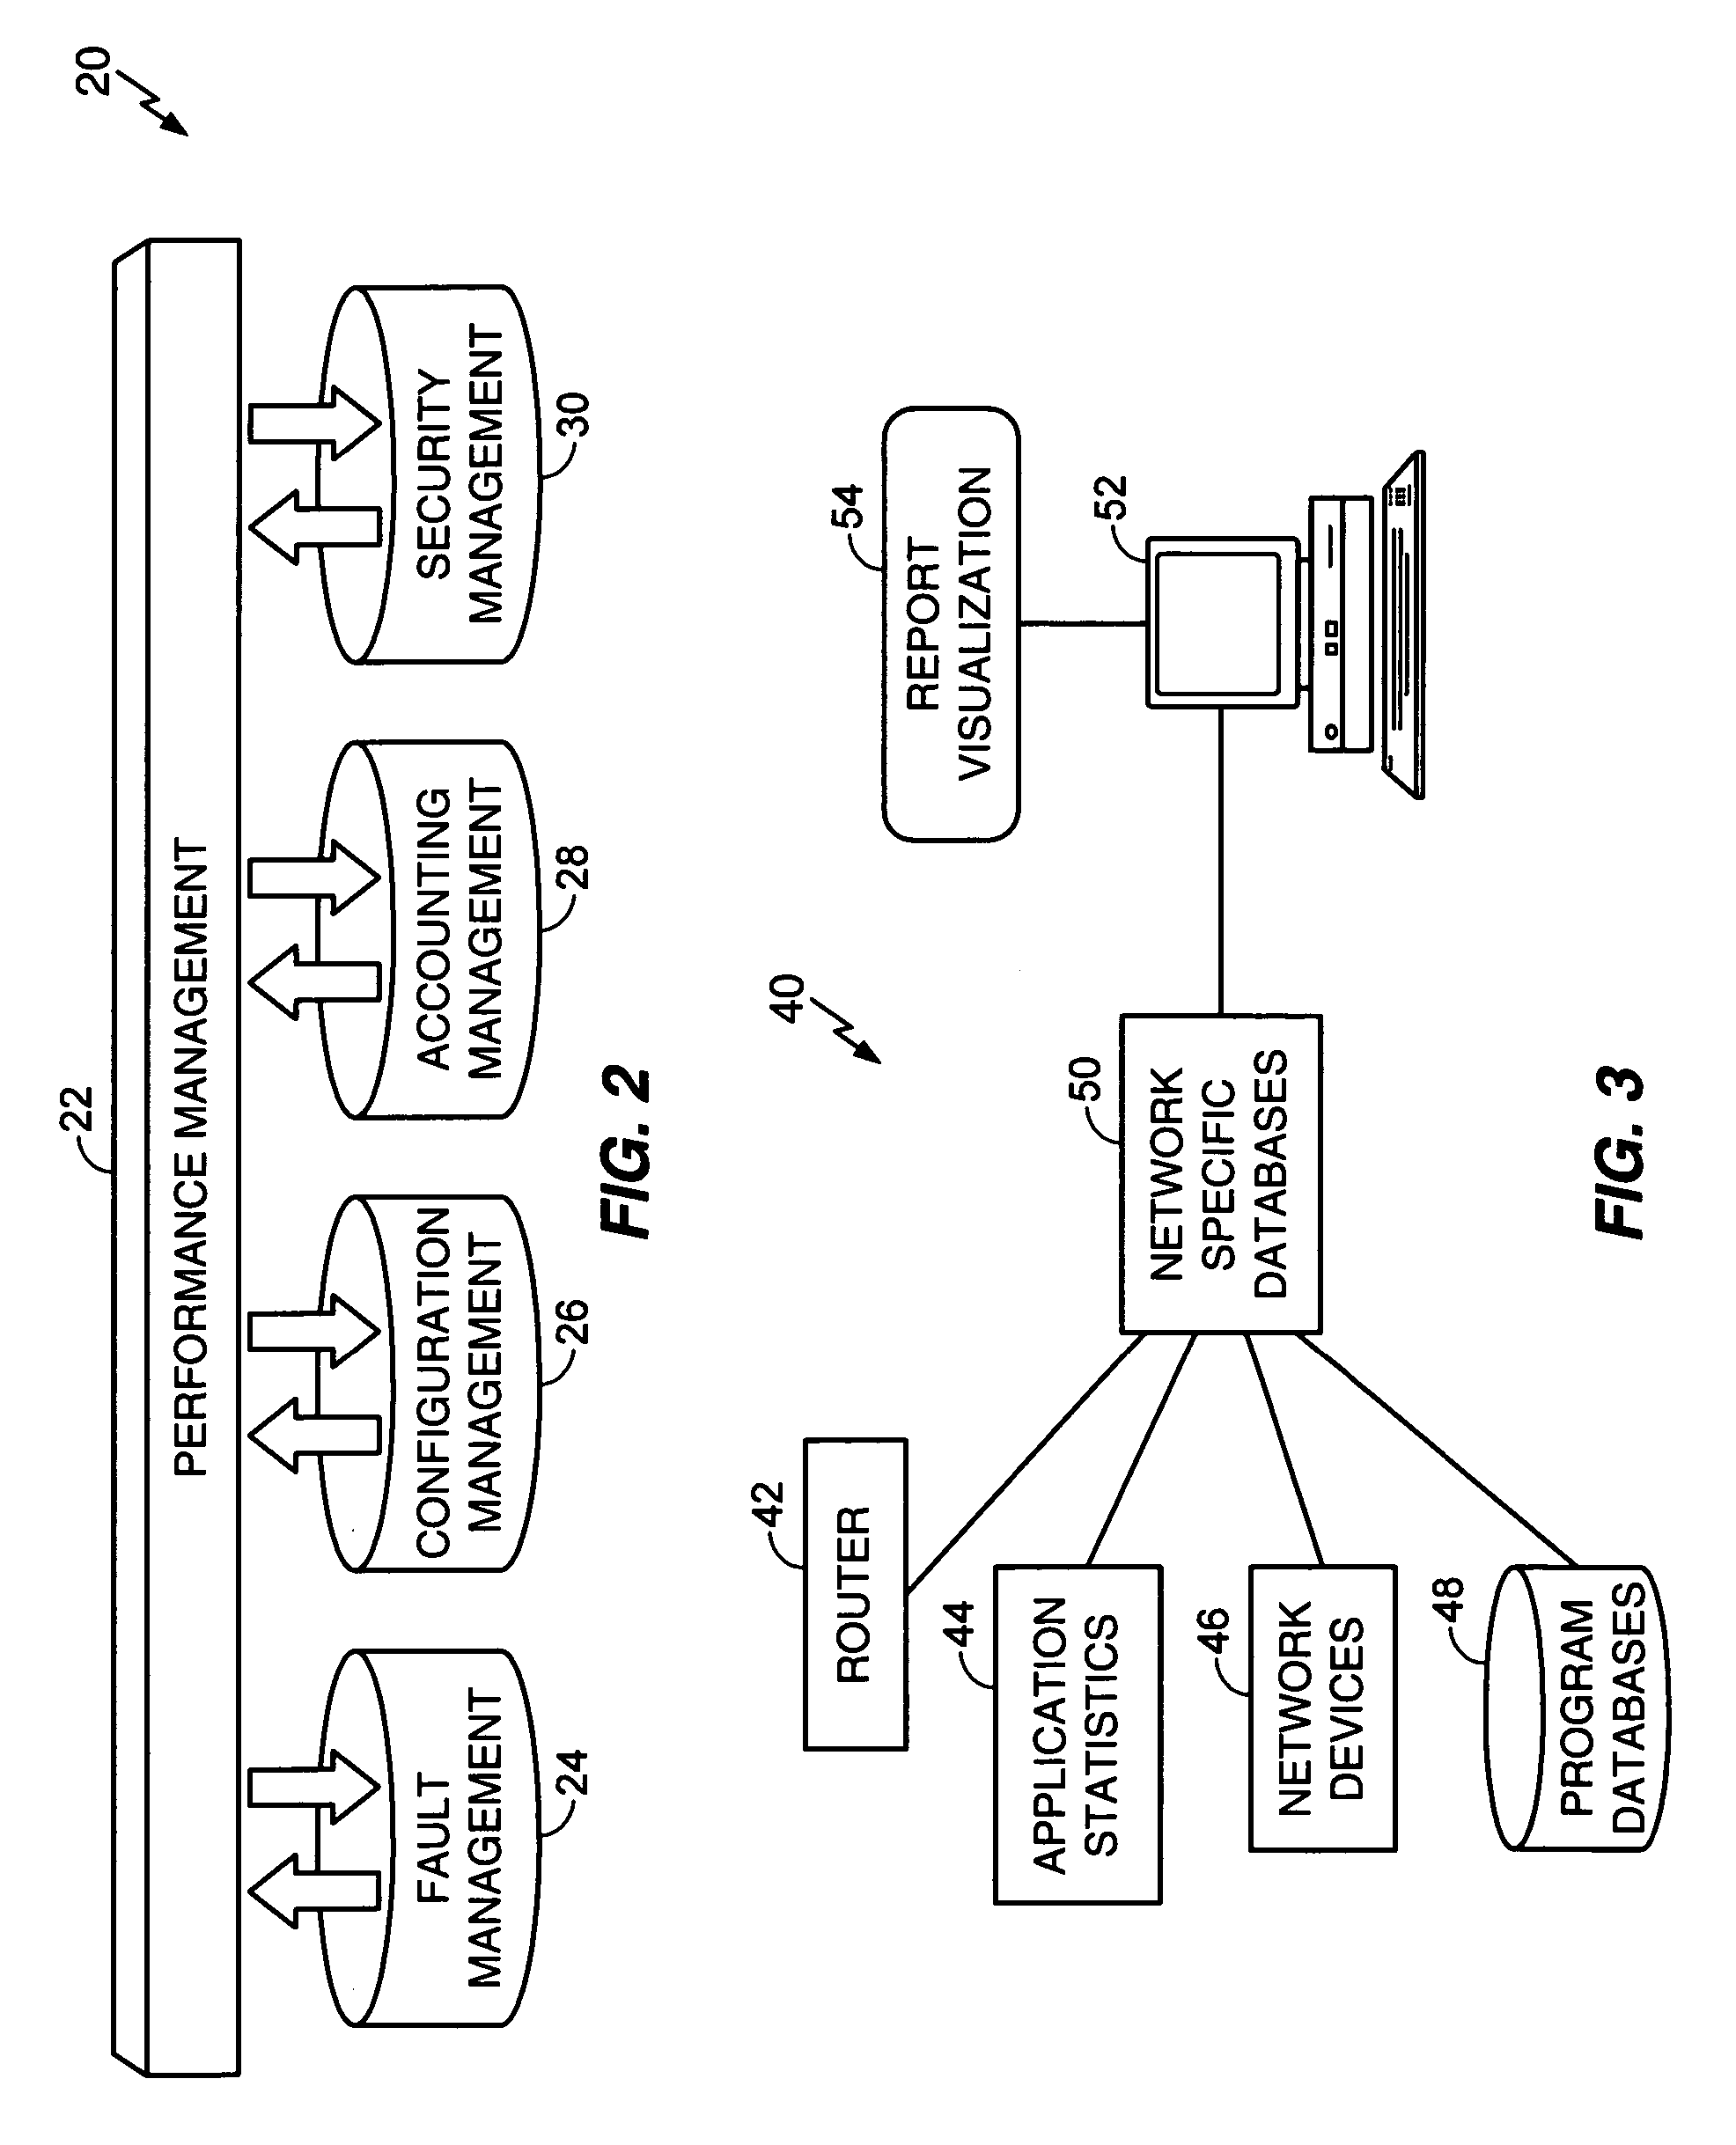 Method and system for visualizing network performace characteristics